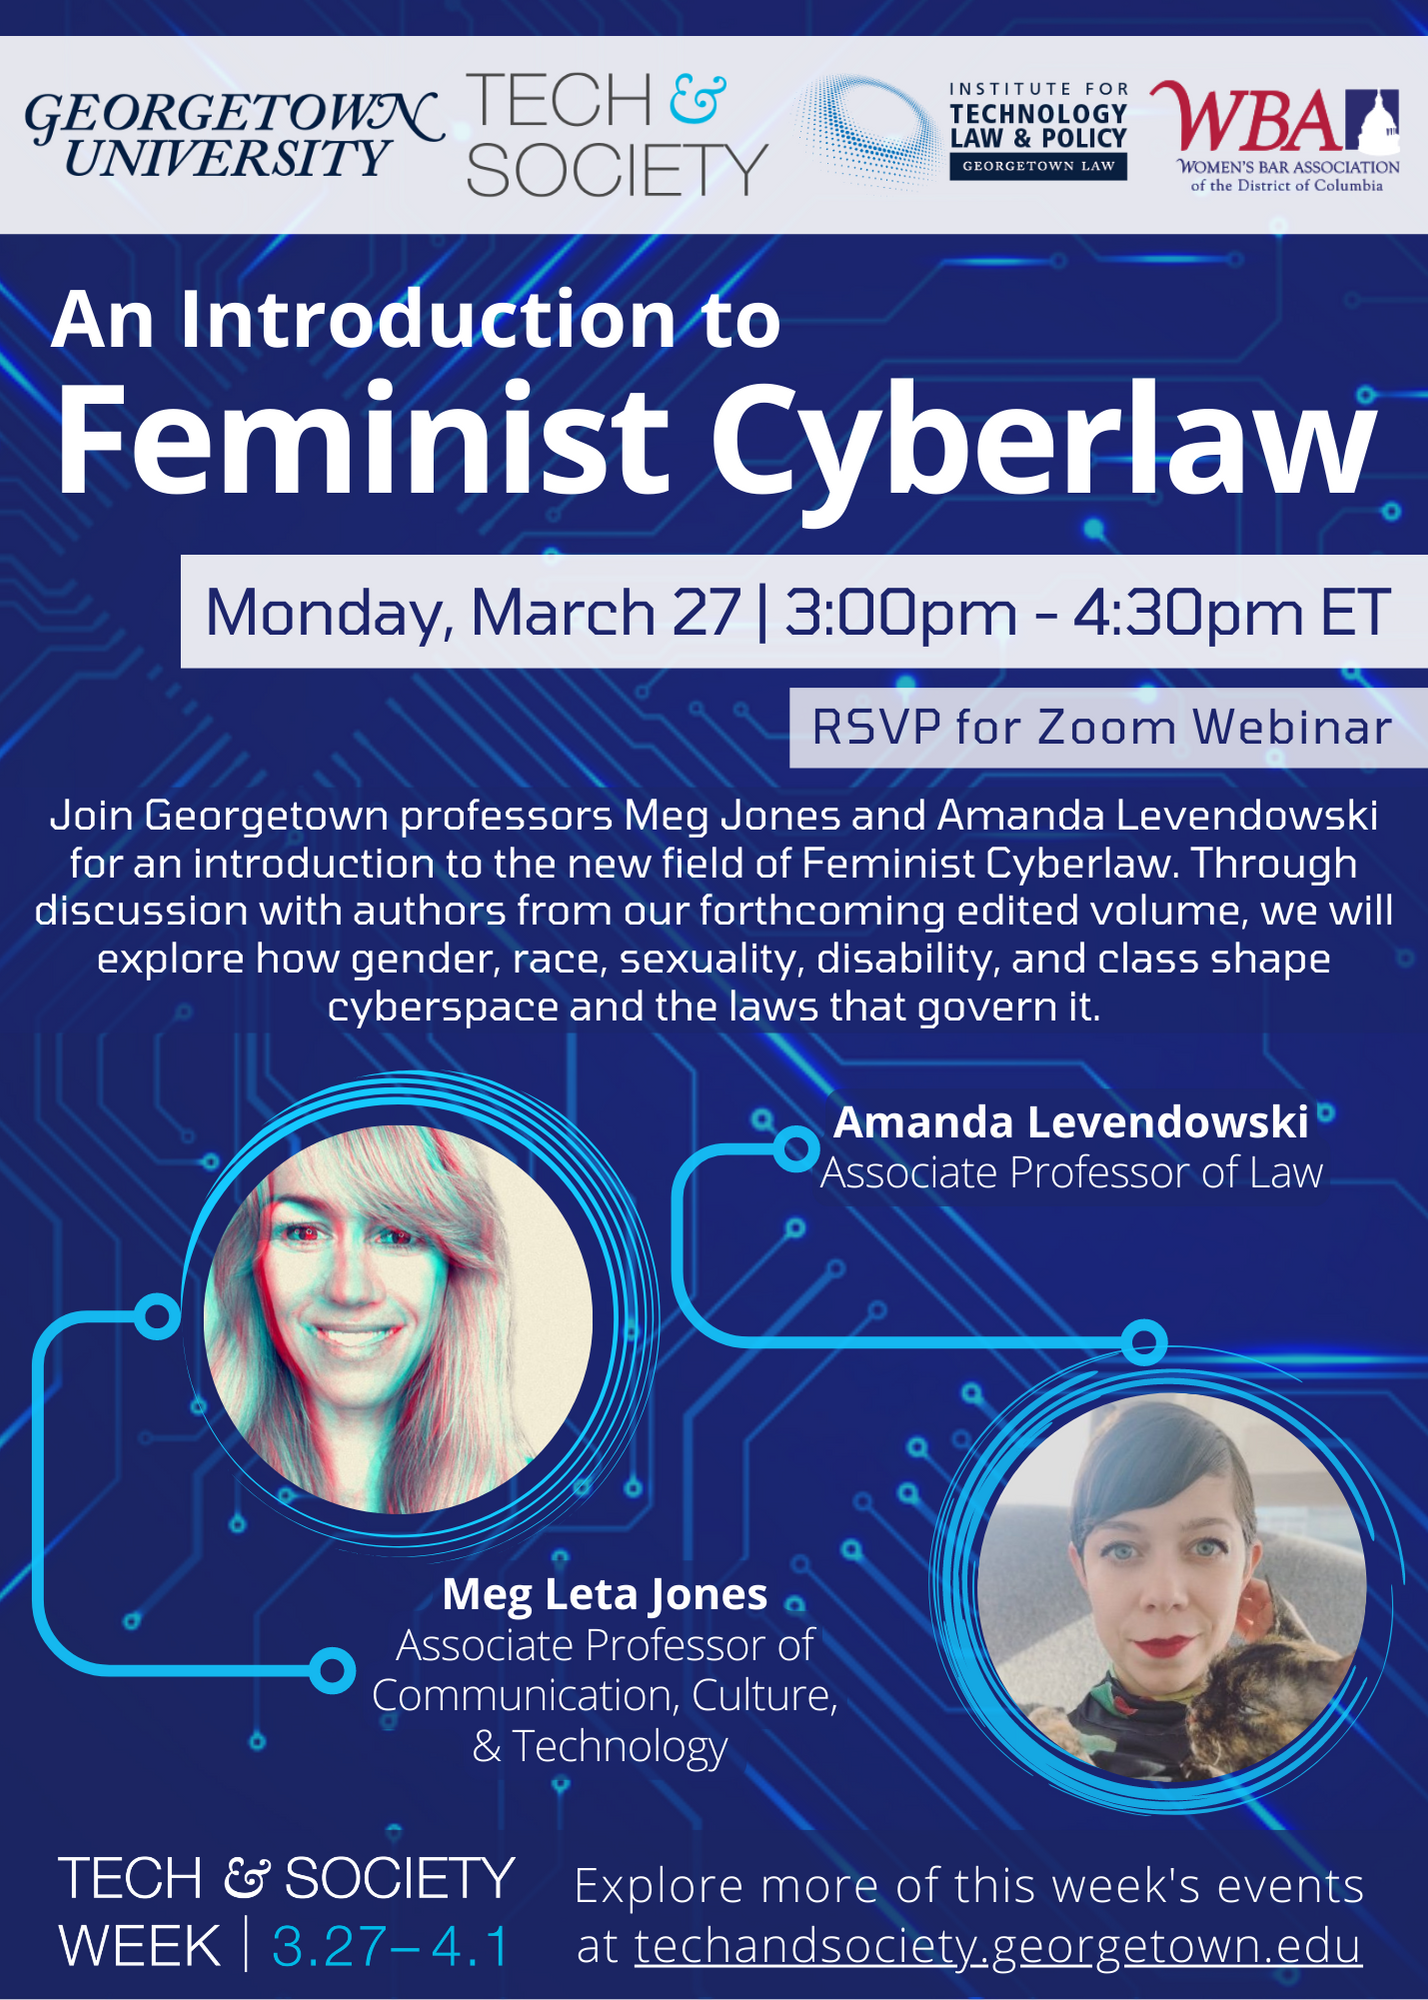 Register for the An Introduction to Feminist Cyberlaw Webinar